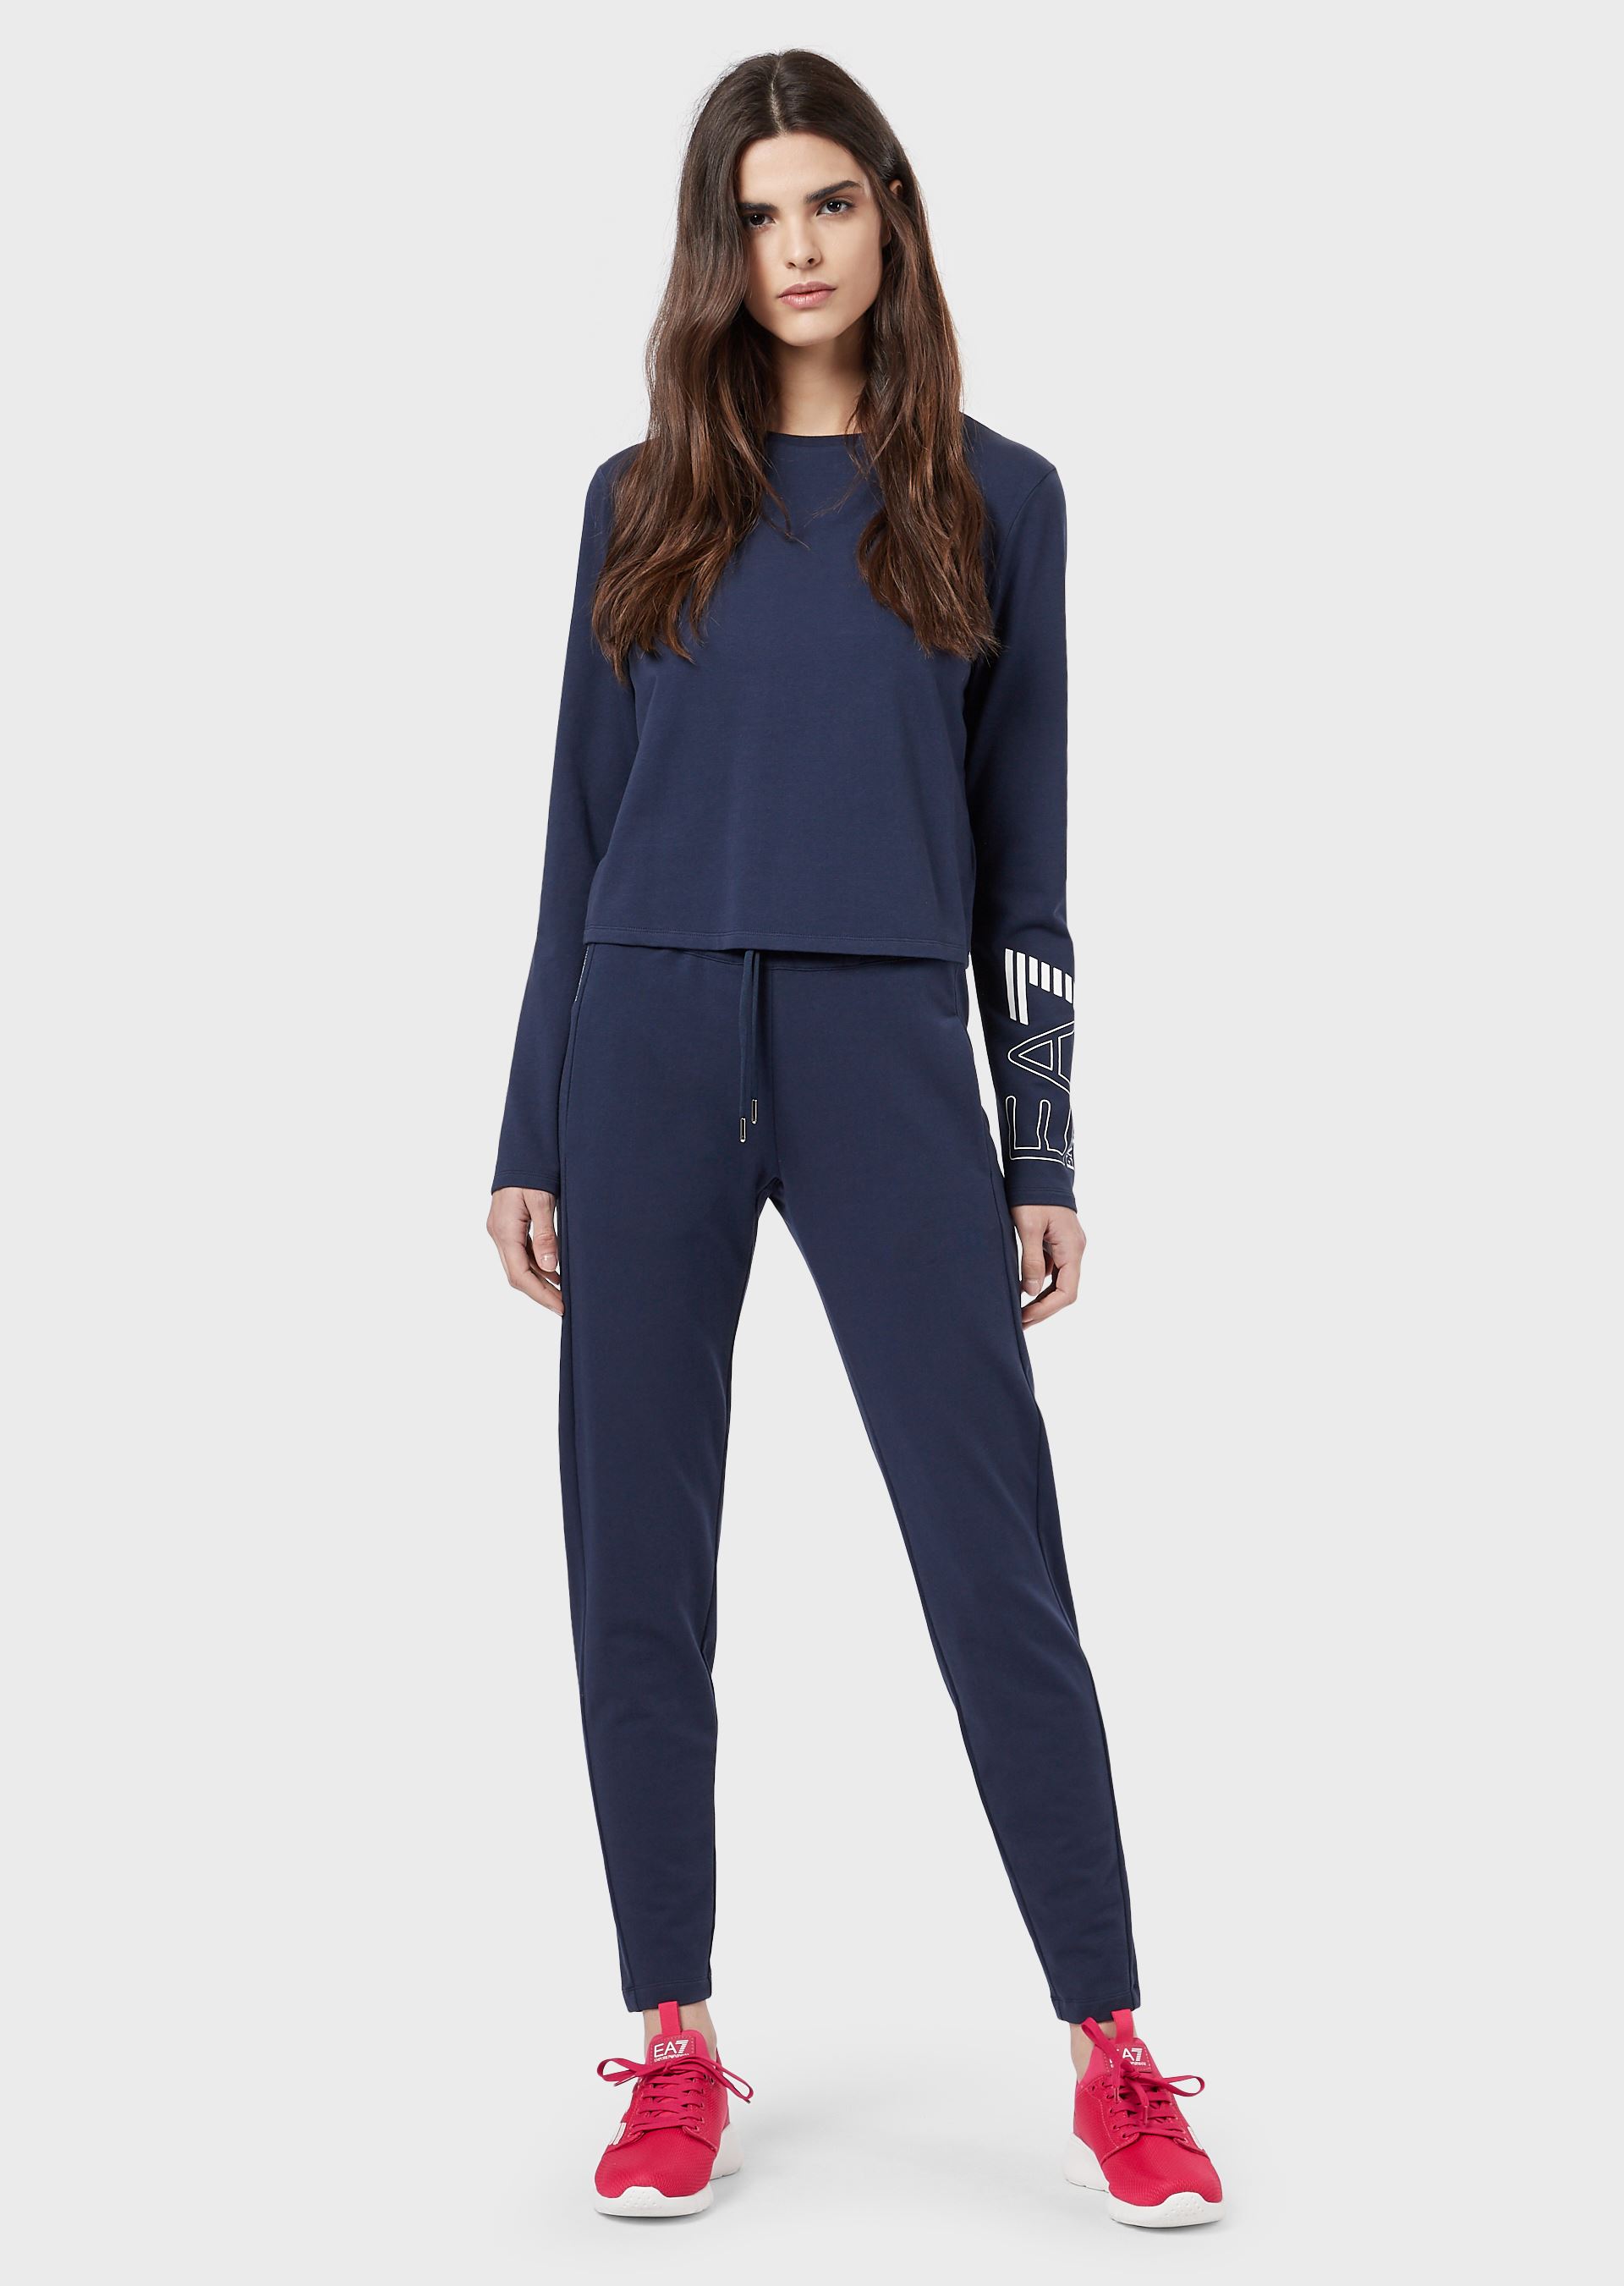 Emporio Armani Tracksuits - Item 43200964 In Navy Blue